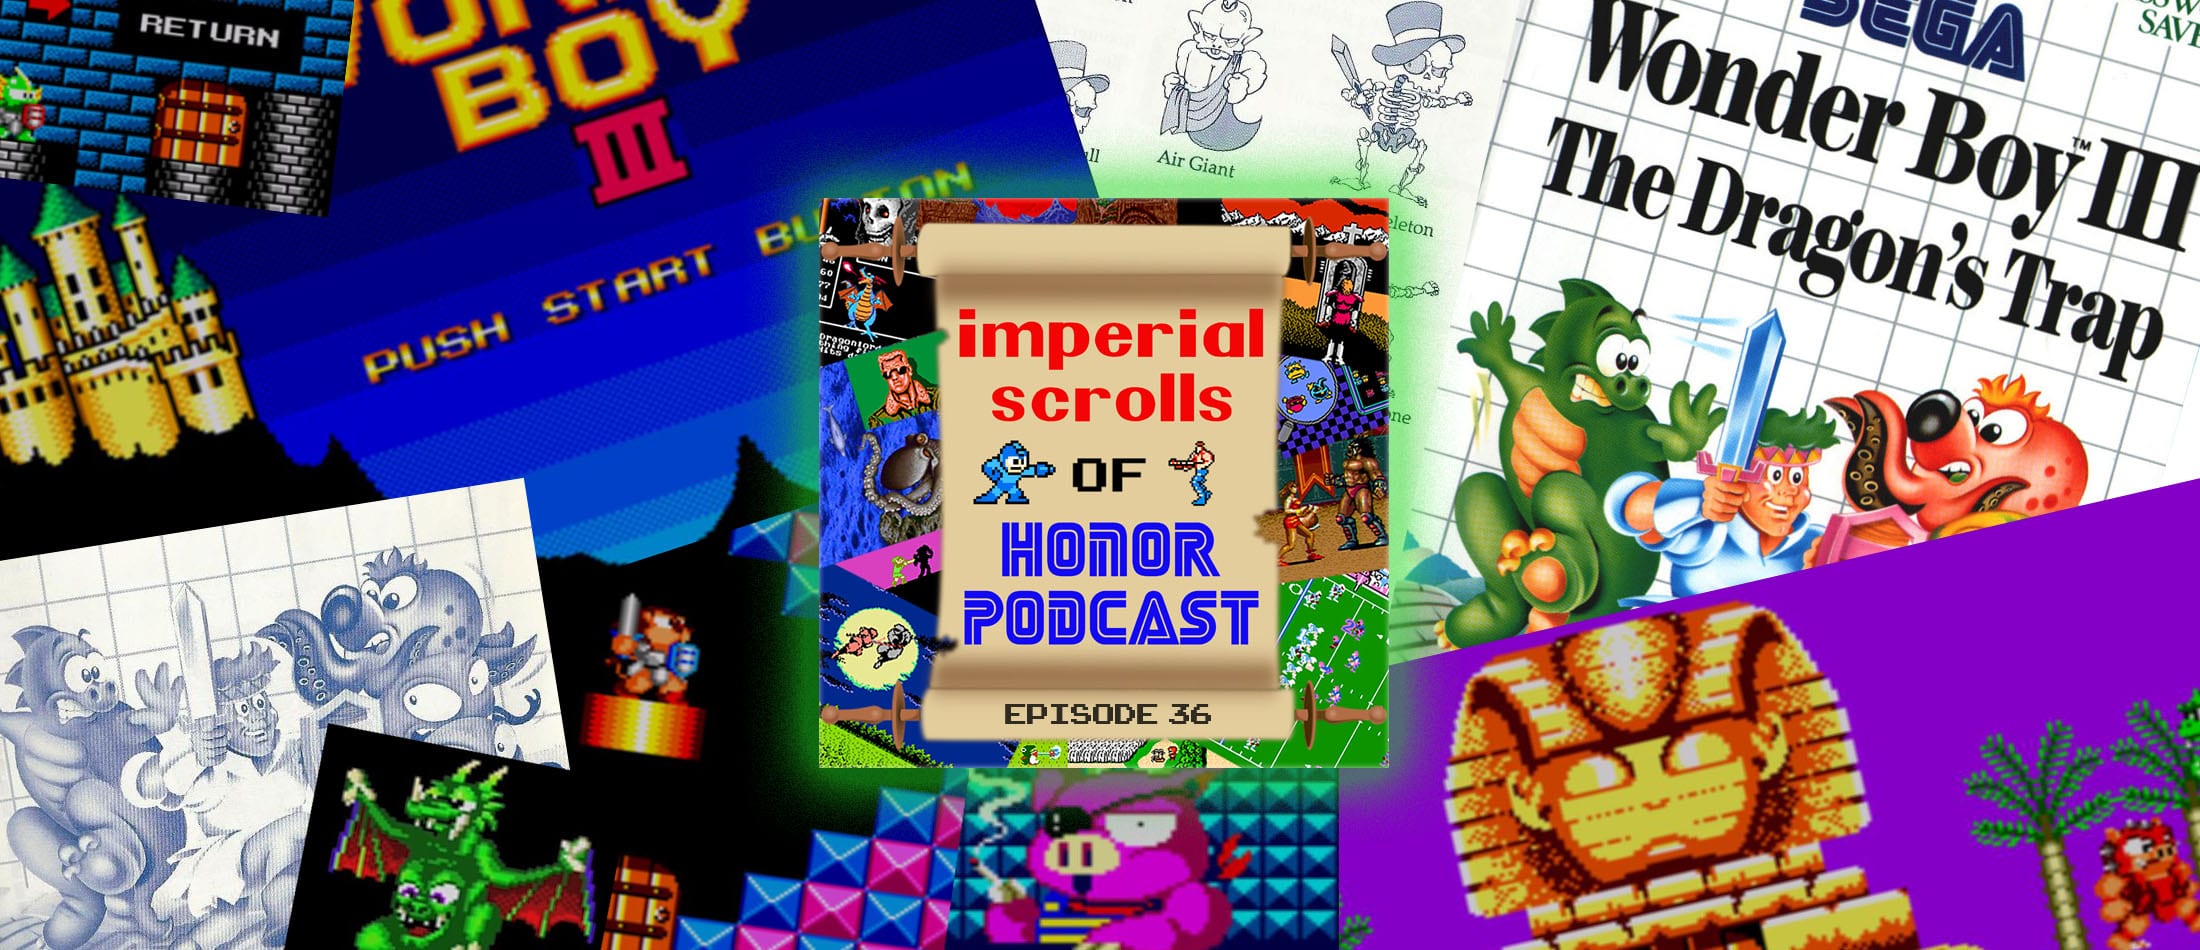 Imperial Scrolls of Honor Podcast - Episode 36 - Wonder Boy III: Dragon's Trap